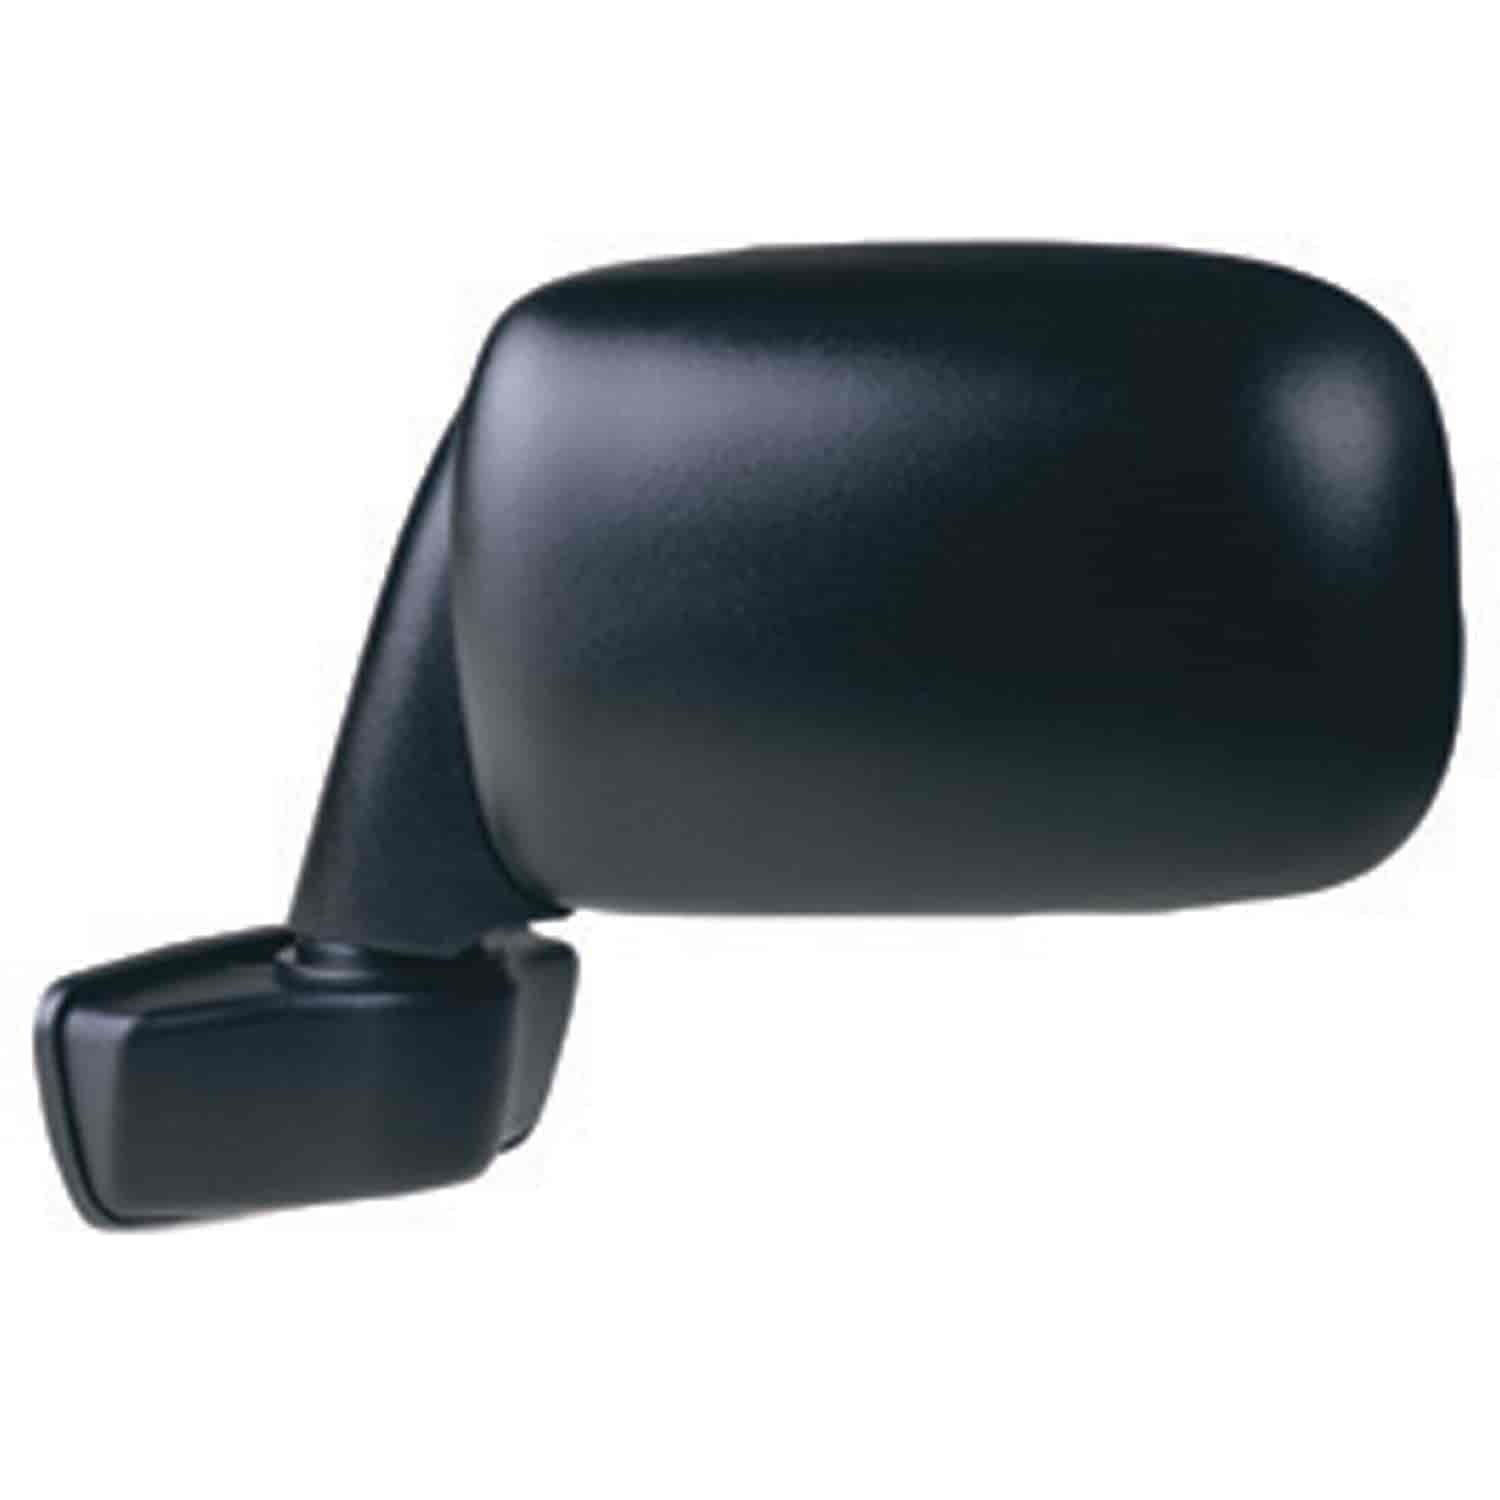 Universal Car Mirror Euro Style 4 1/4 x 6 1/4 universal fit black finish fits driver or passenger side easy install.